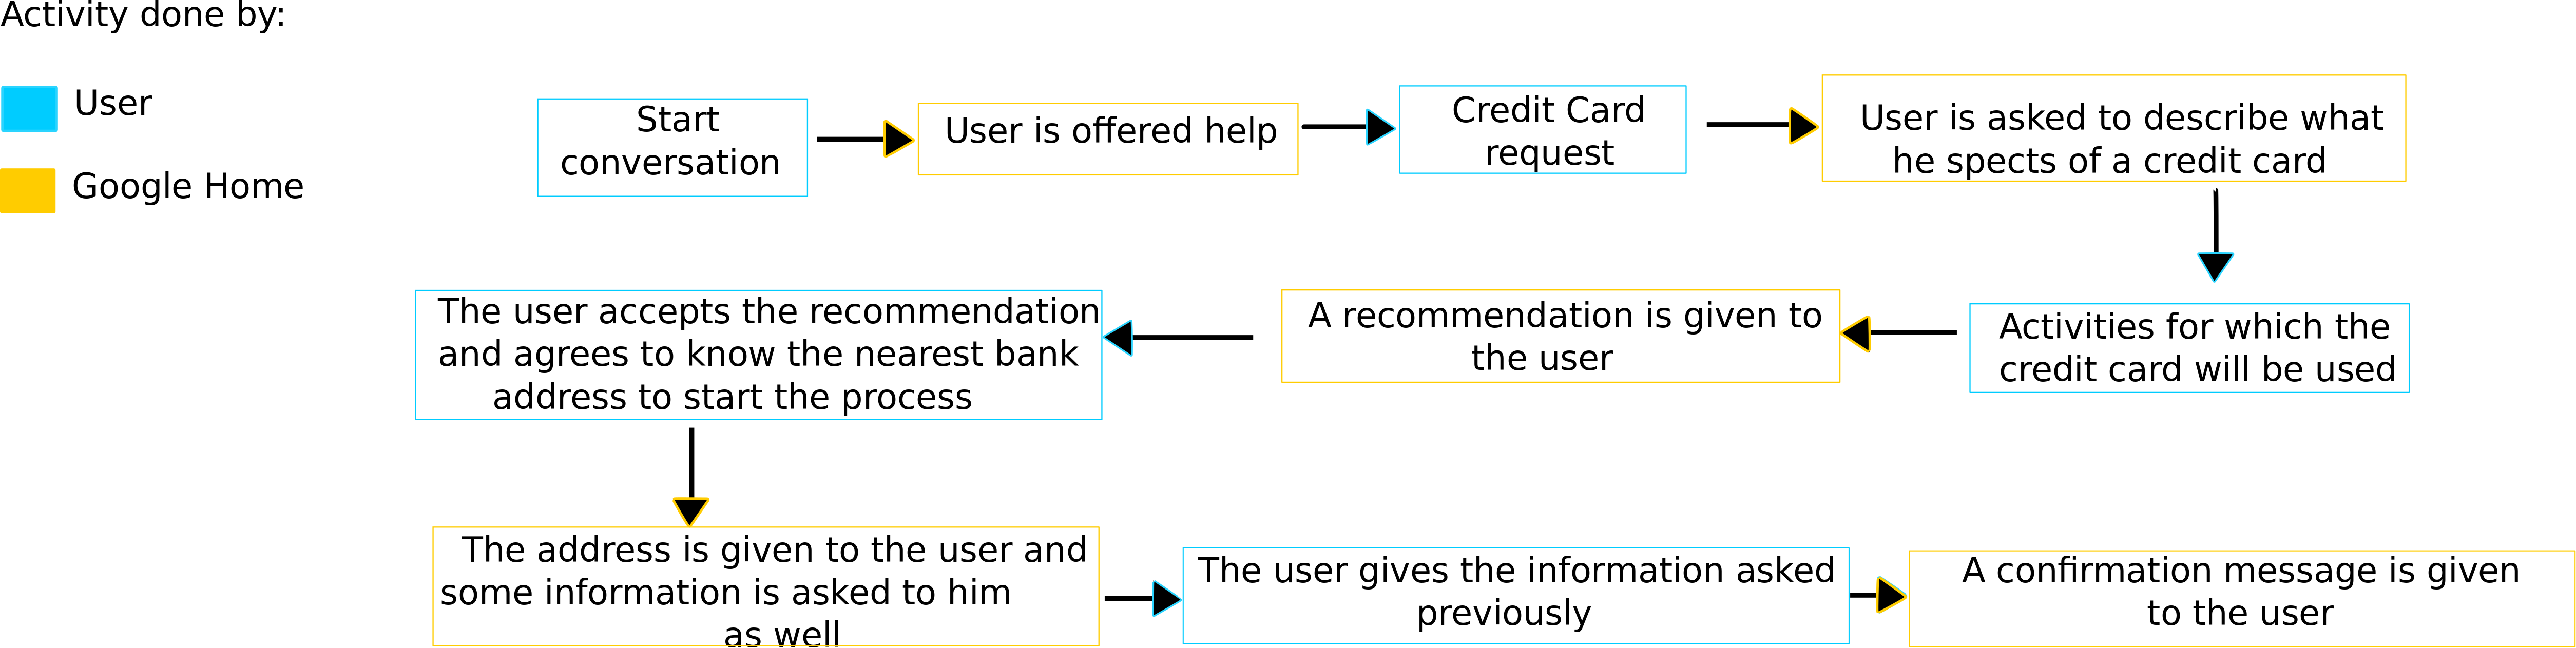 End-to-End Credit Card Acquisition Process